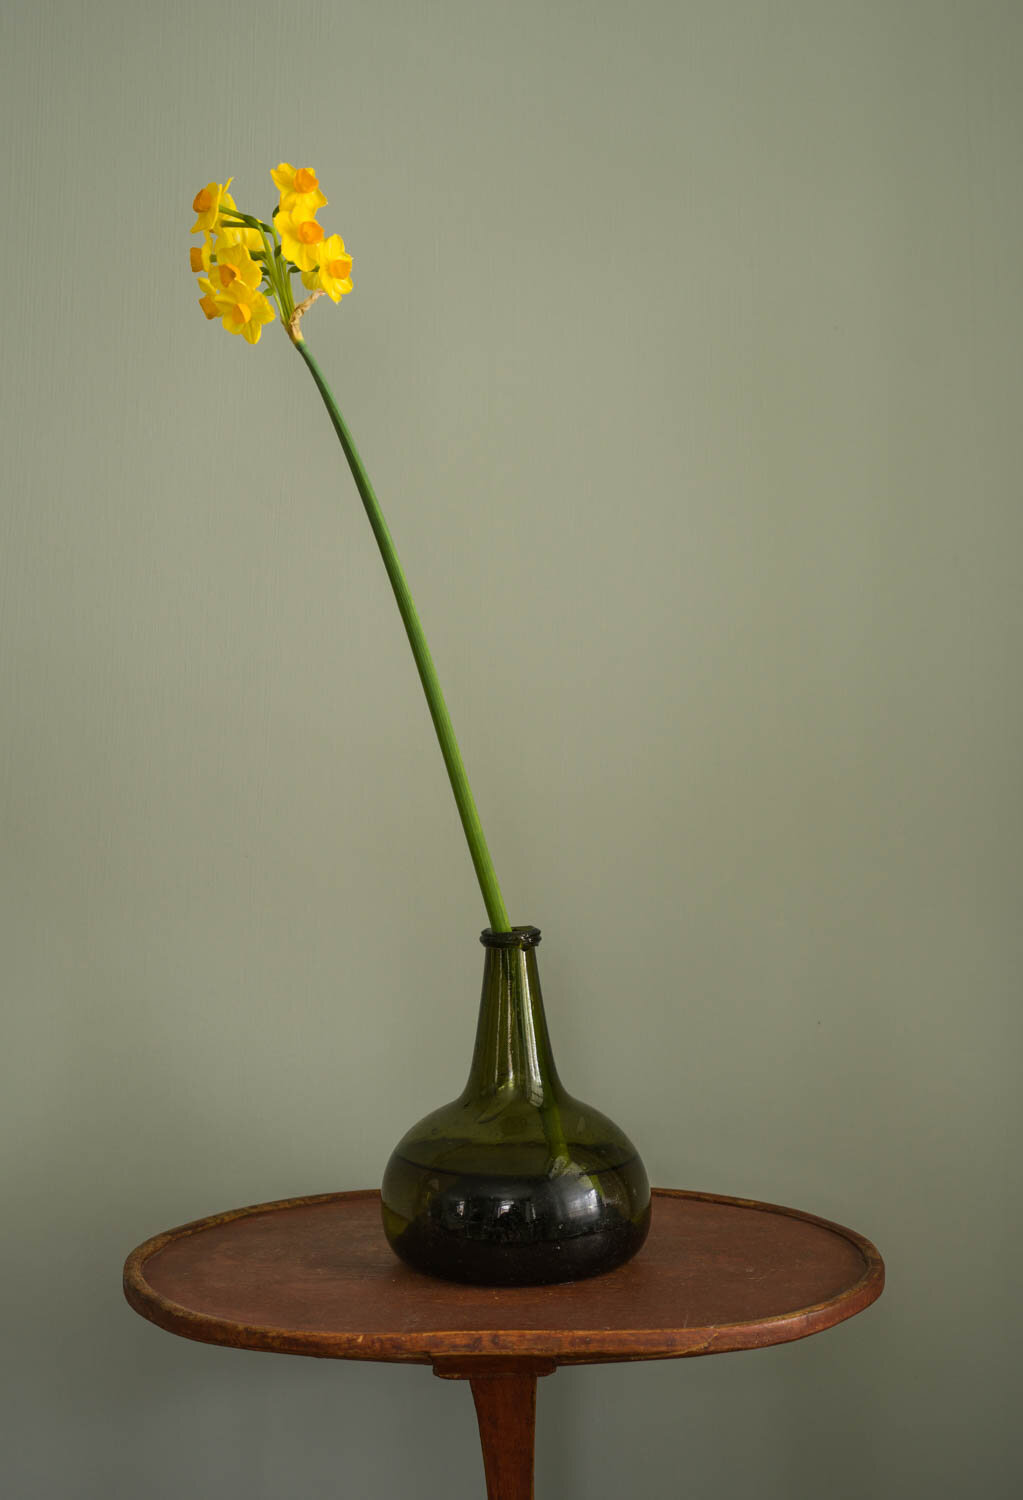 Narcissus in Wine Bottle